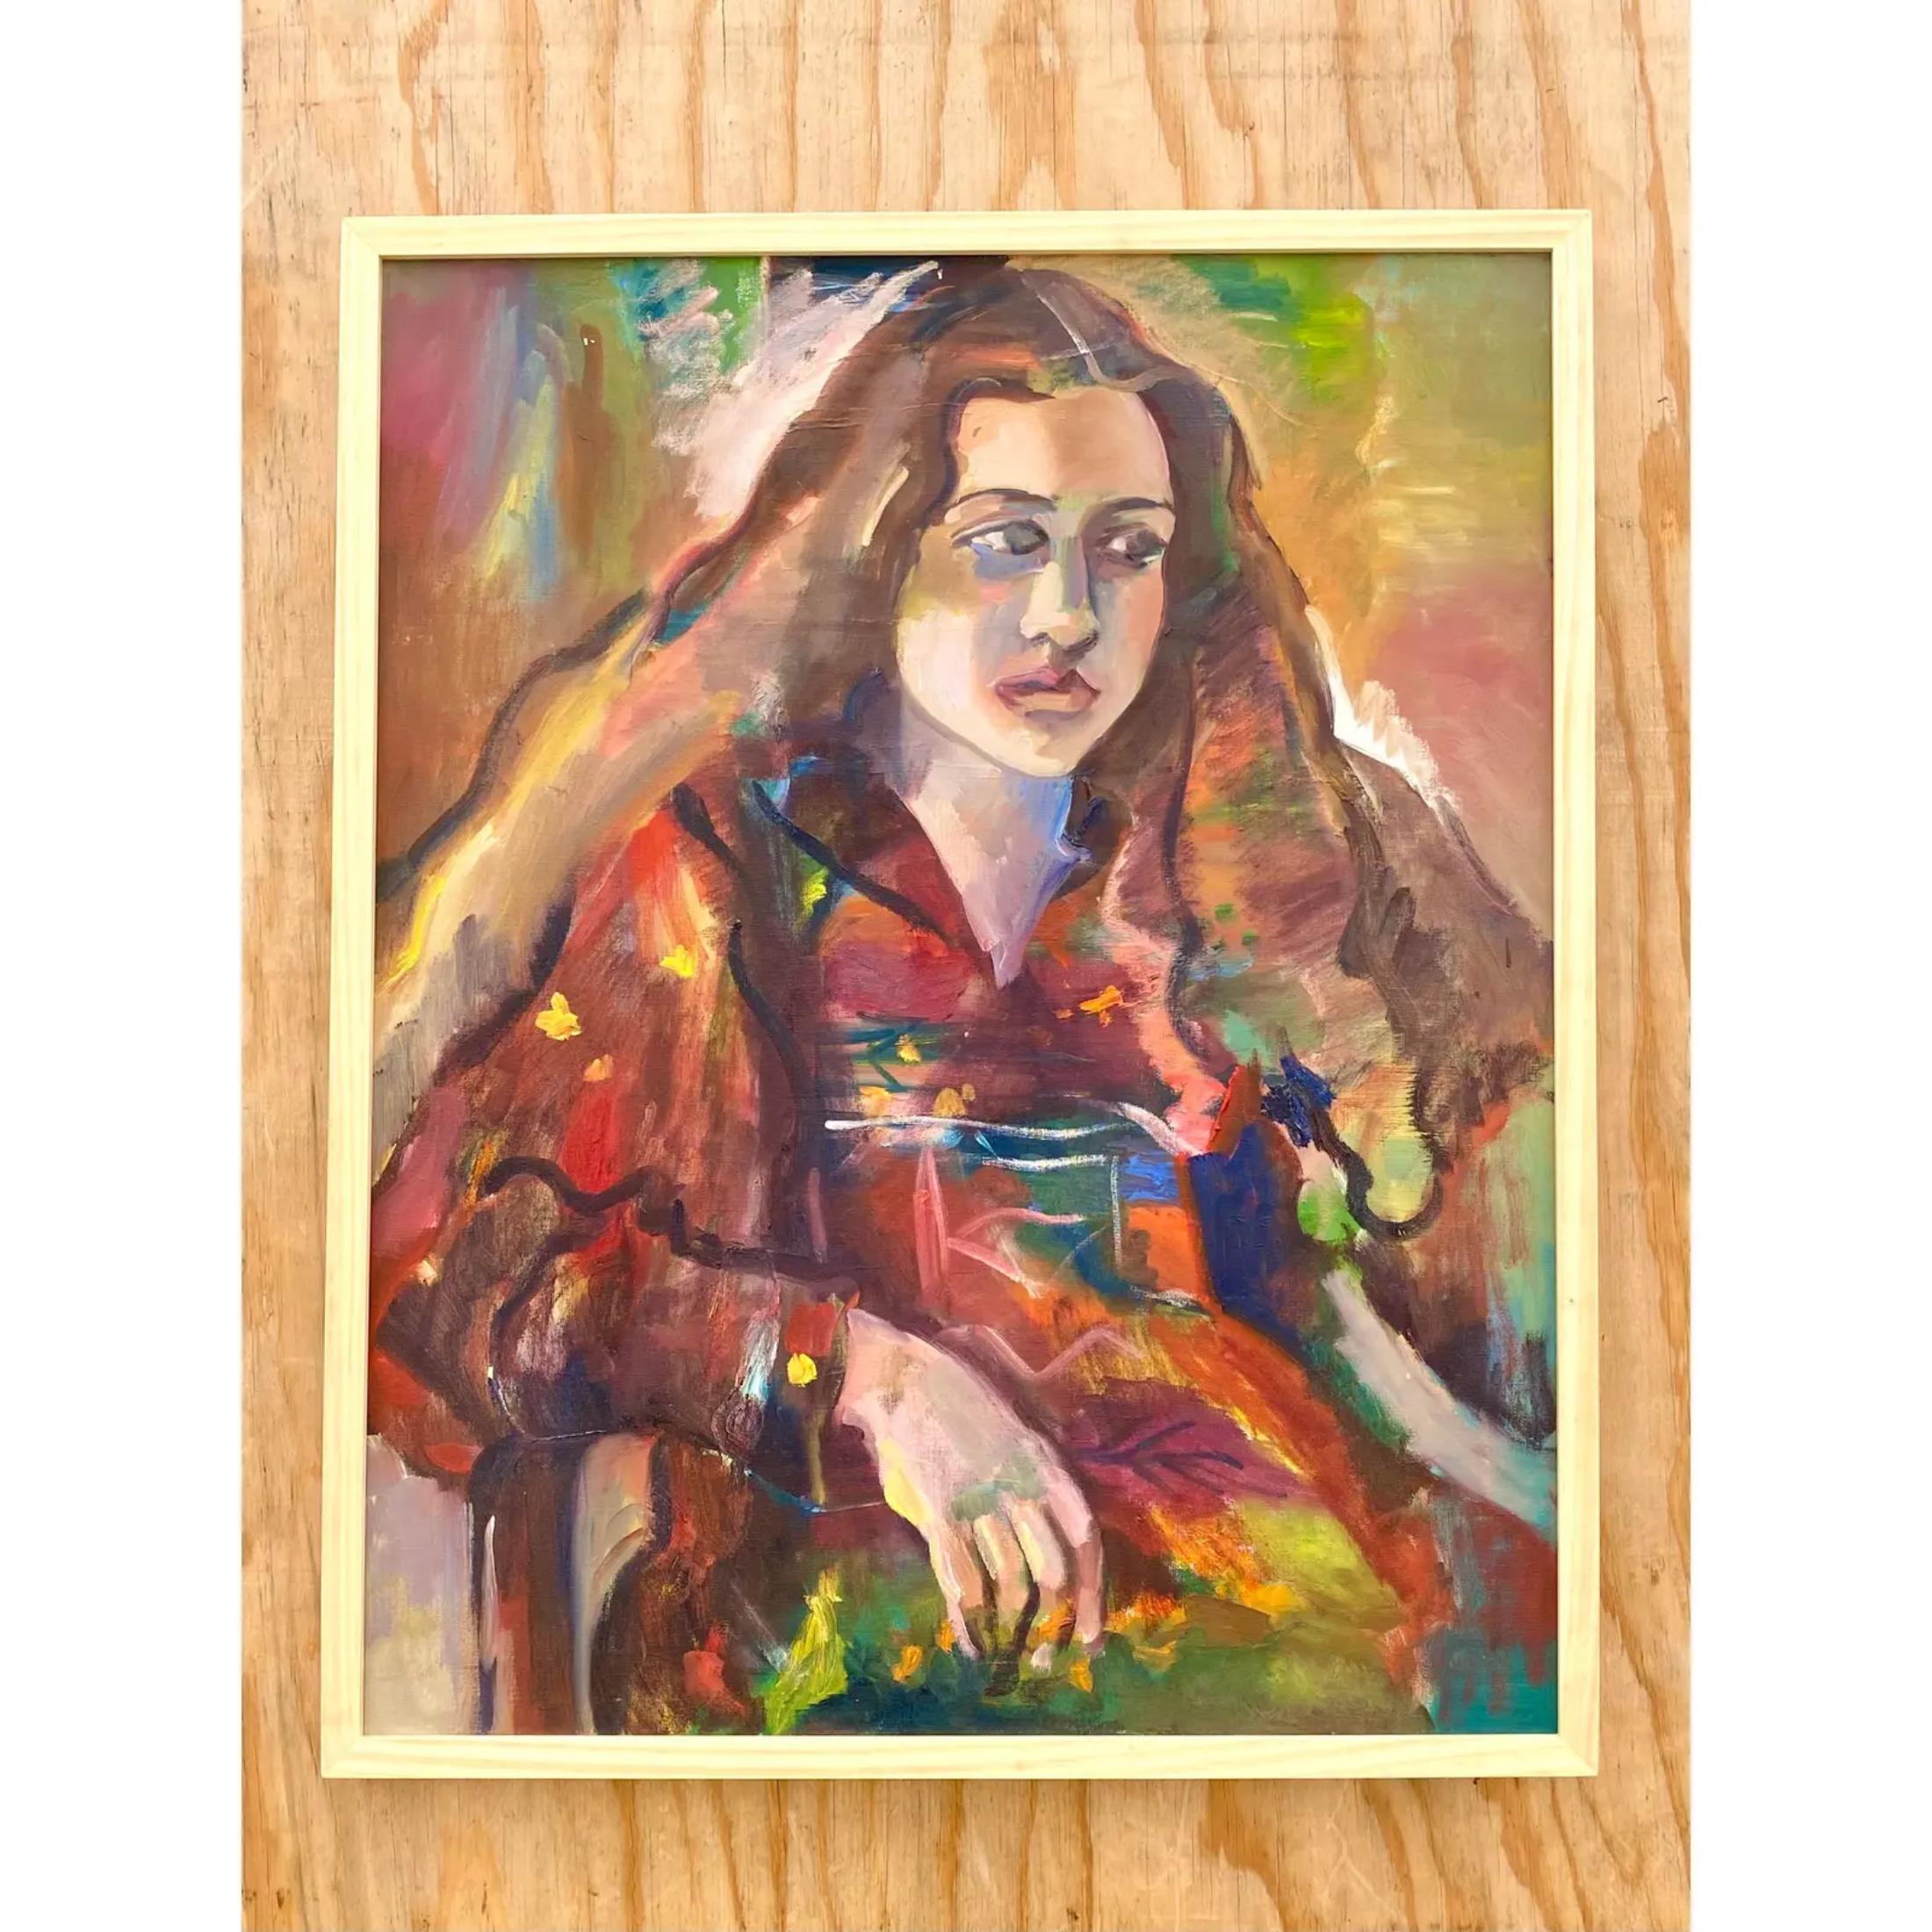 Fantastic vintage Boho oil painting. A beautiful composition of a young woman with long hair. Brilliant painterly stokes with deep rich colors. Acquired from a Palm Beach estate.